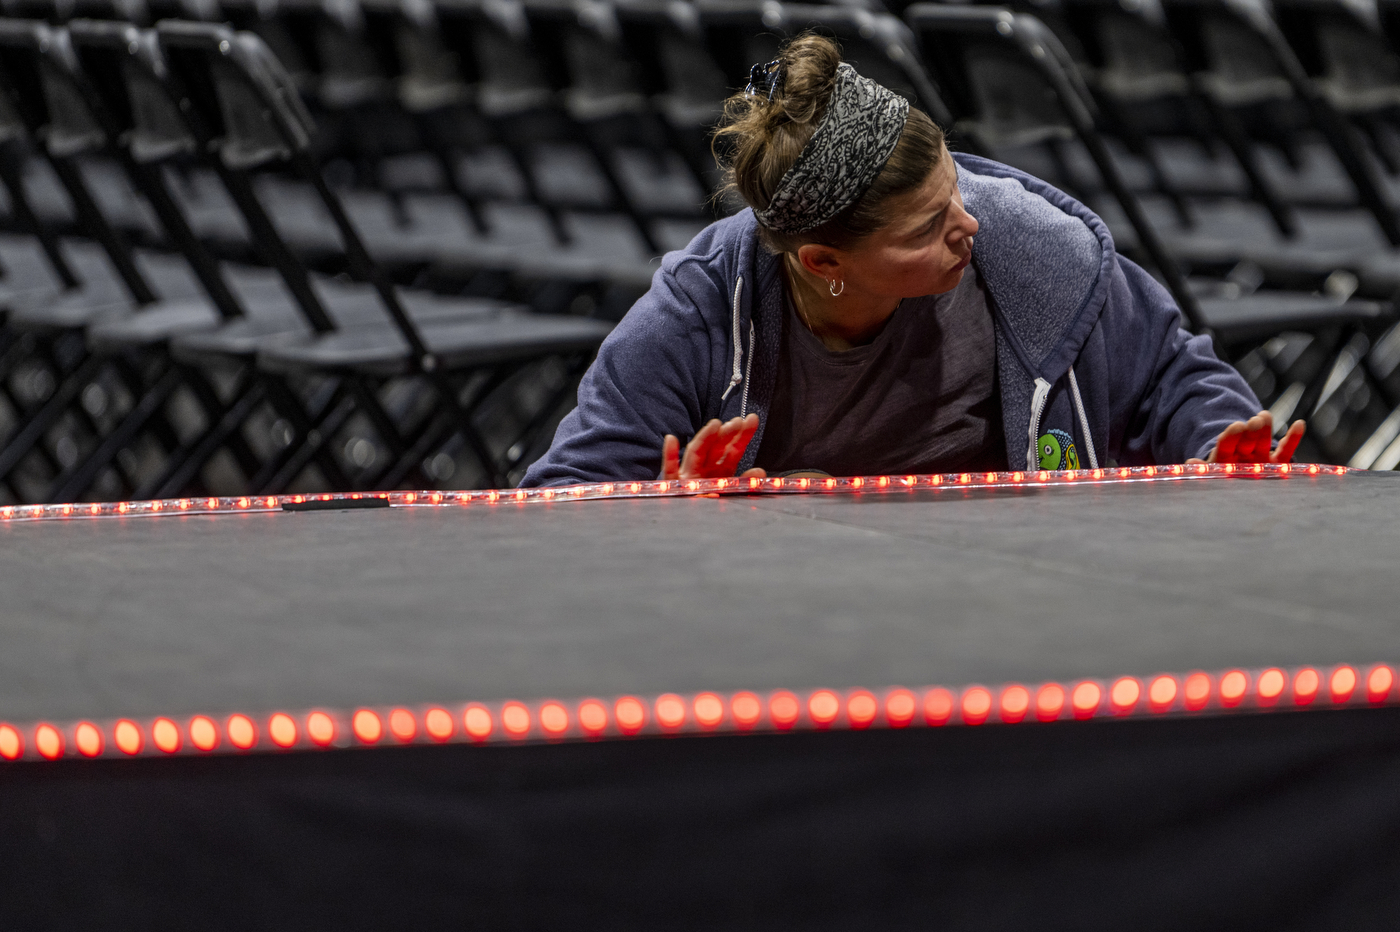 A person is wearing a blue hoodie and a grey shirt while leaning over a row of small red lights to get ready for Northeastern's Convocation.